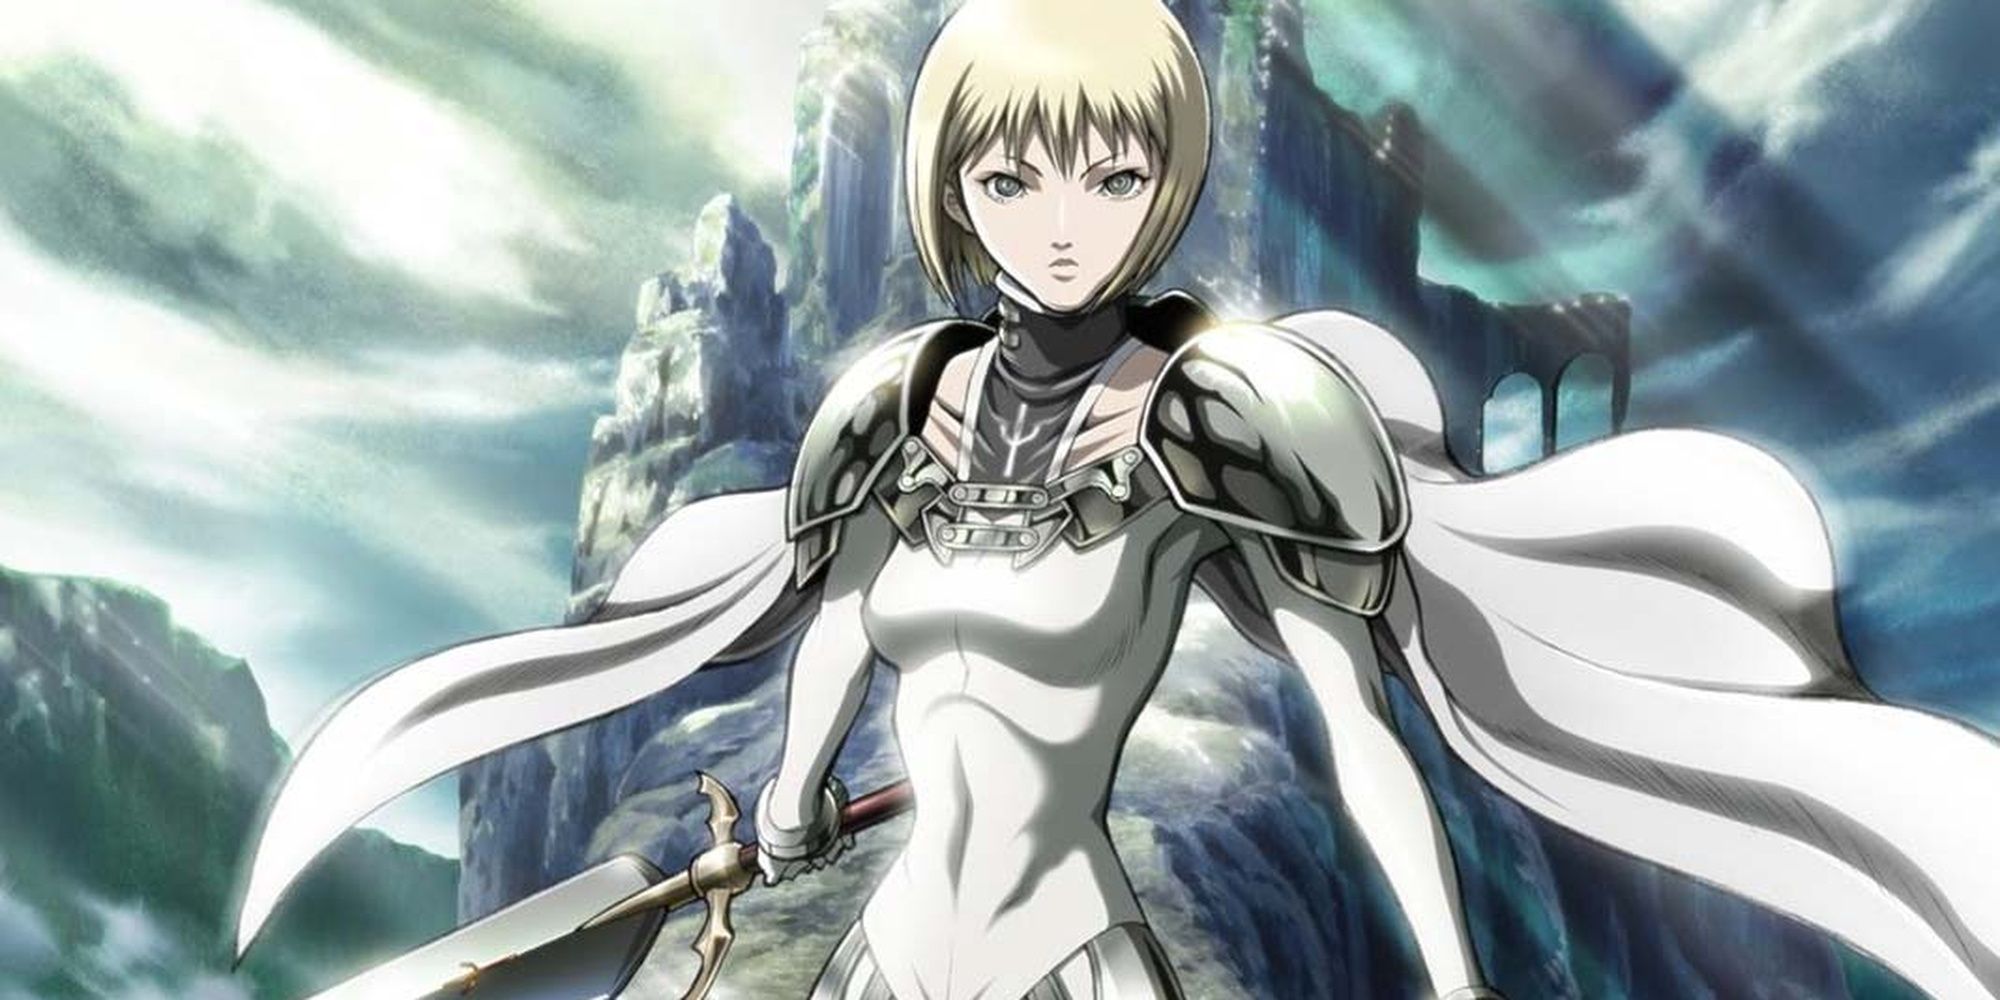 Clare is the main protagonist in Claymore 